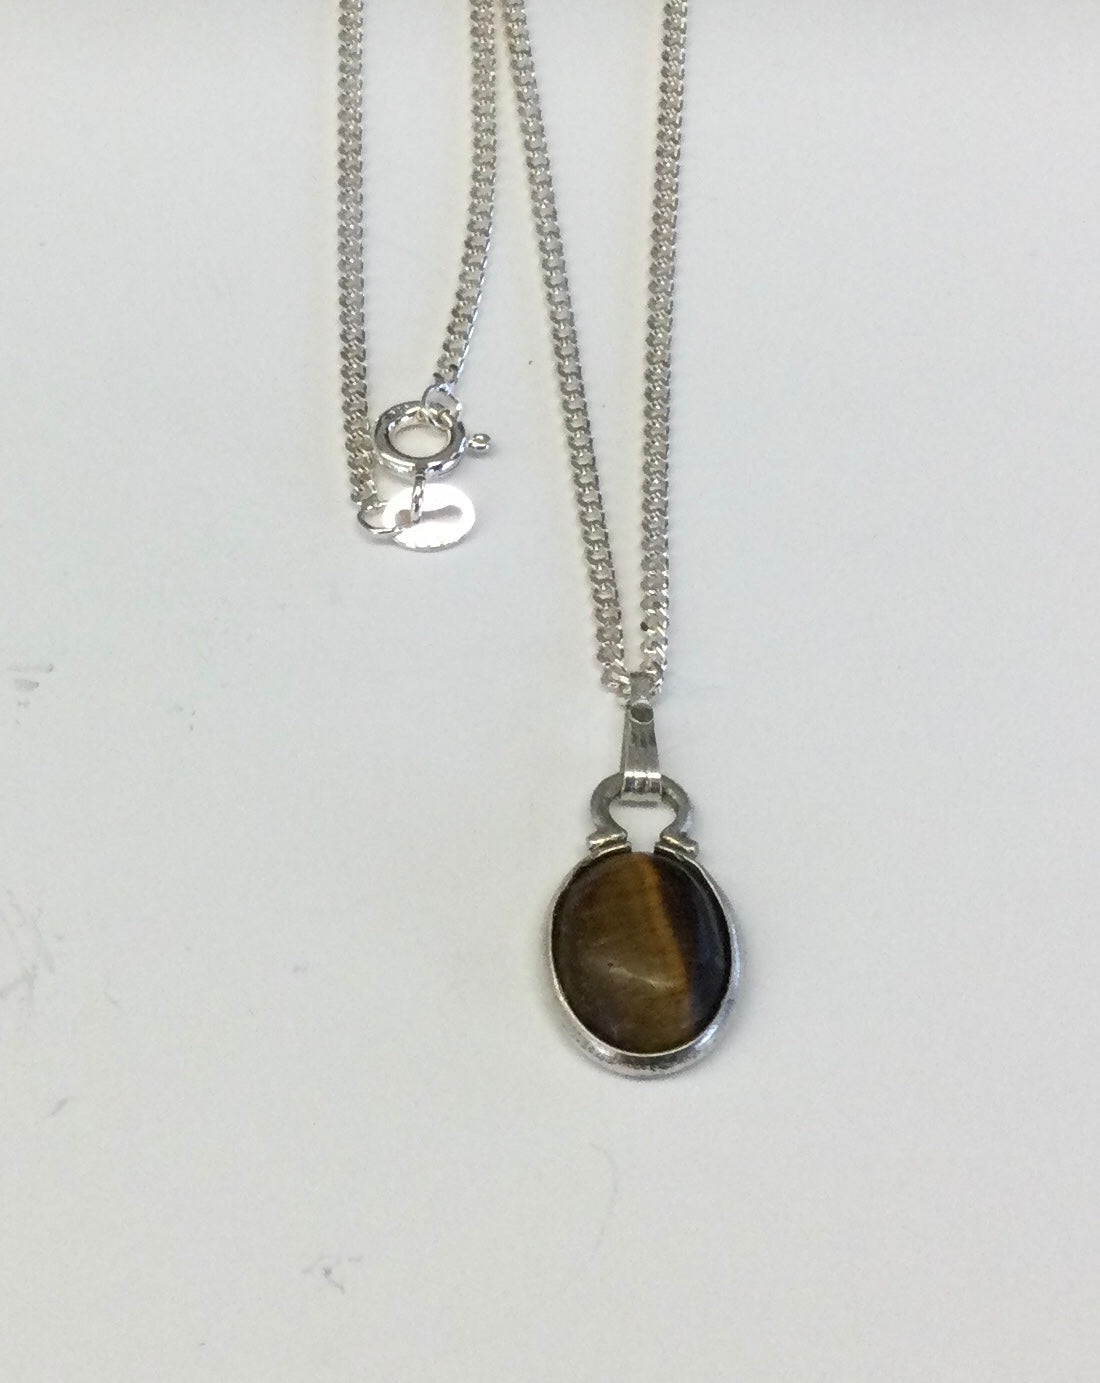 Tiger eye pendant with chain